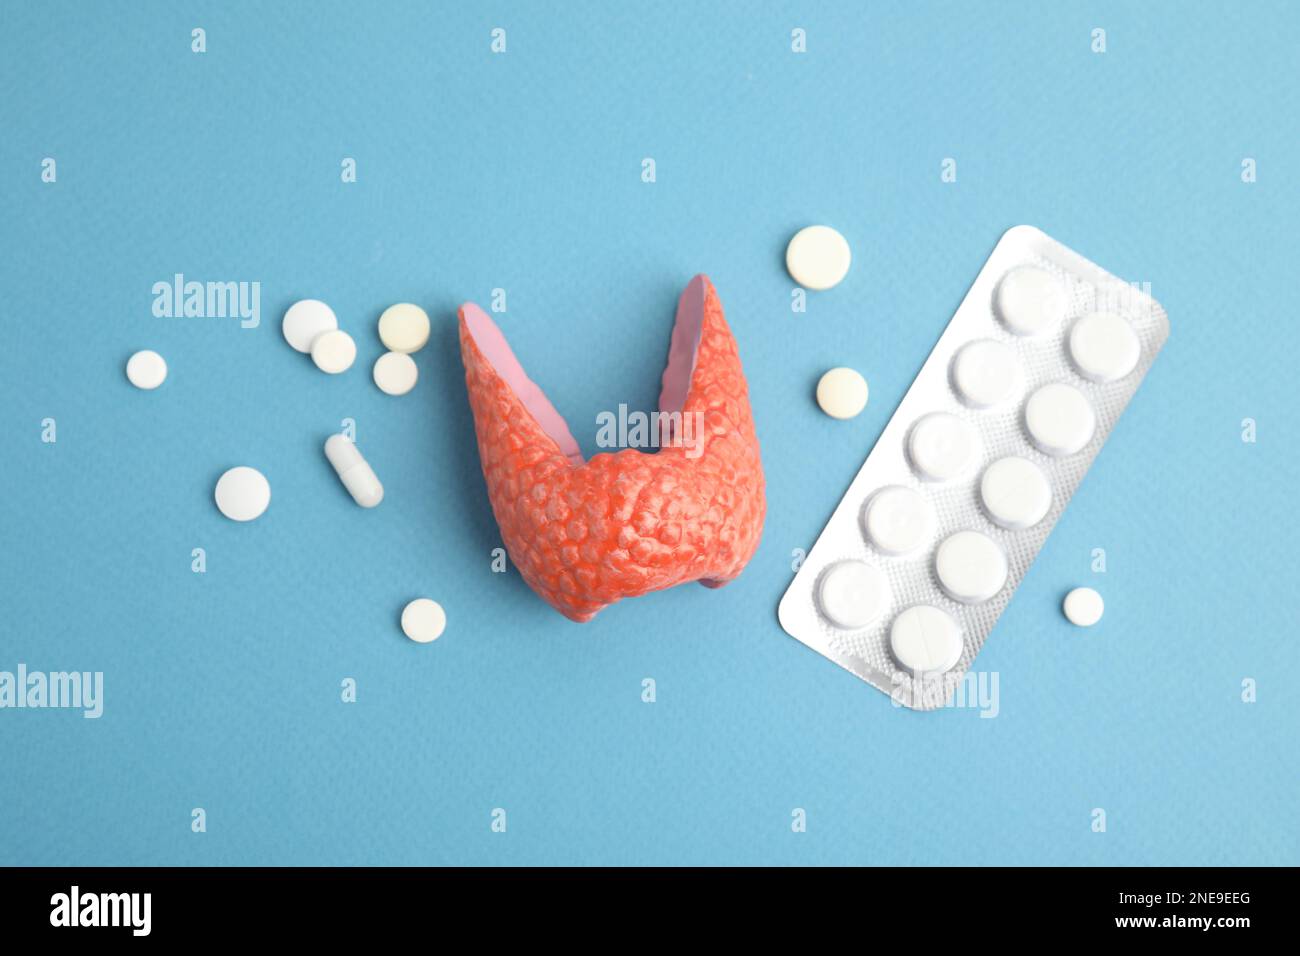 Plastic model of healthy thyroid and pills on light blue background, flat lay Stock Photo